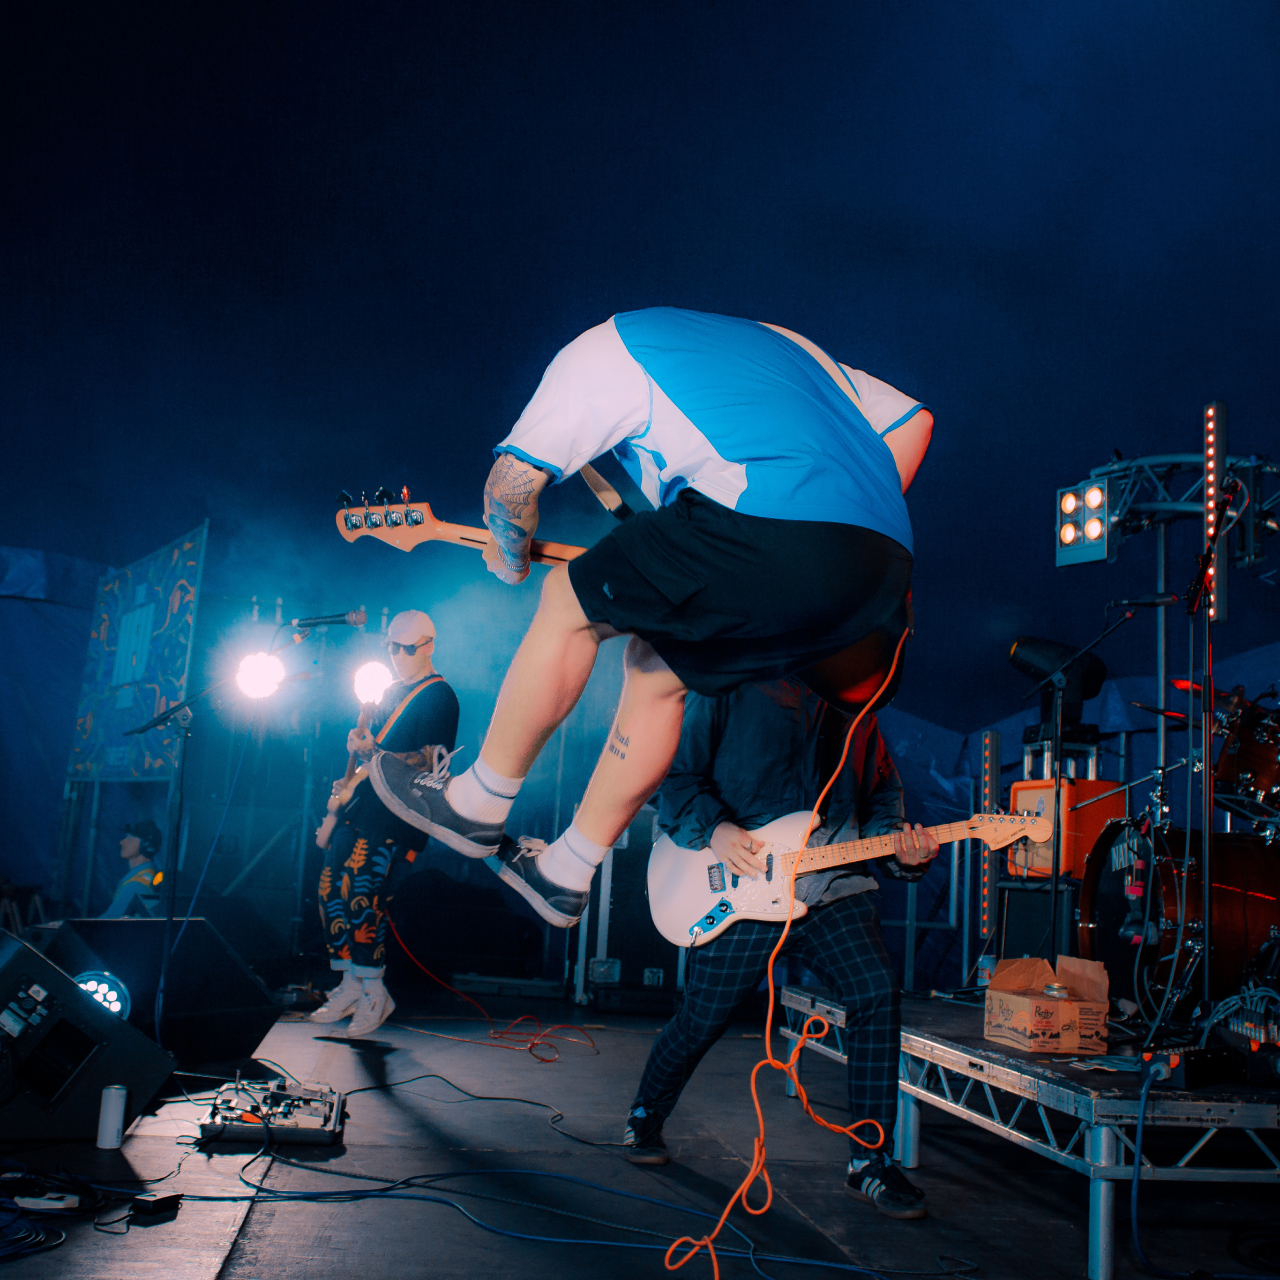 CARSICK jumping on stage image.